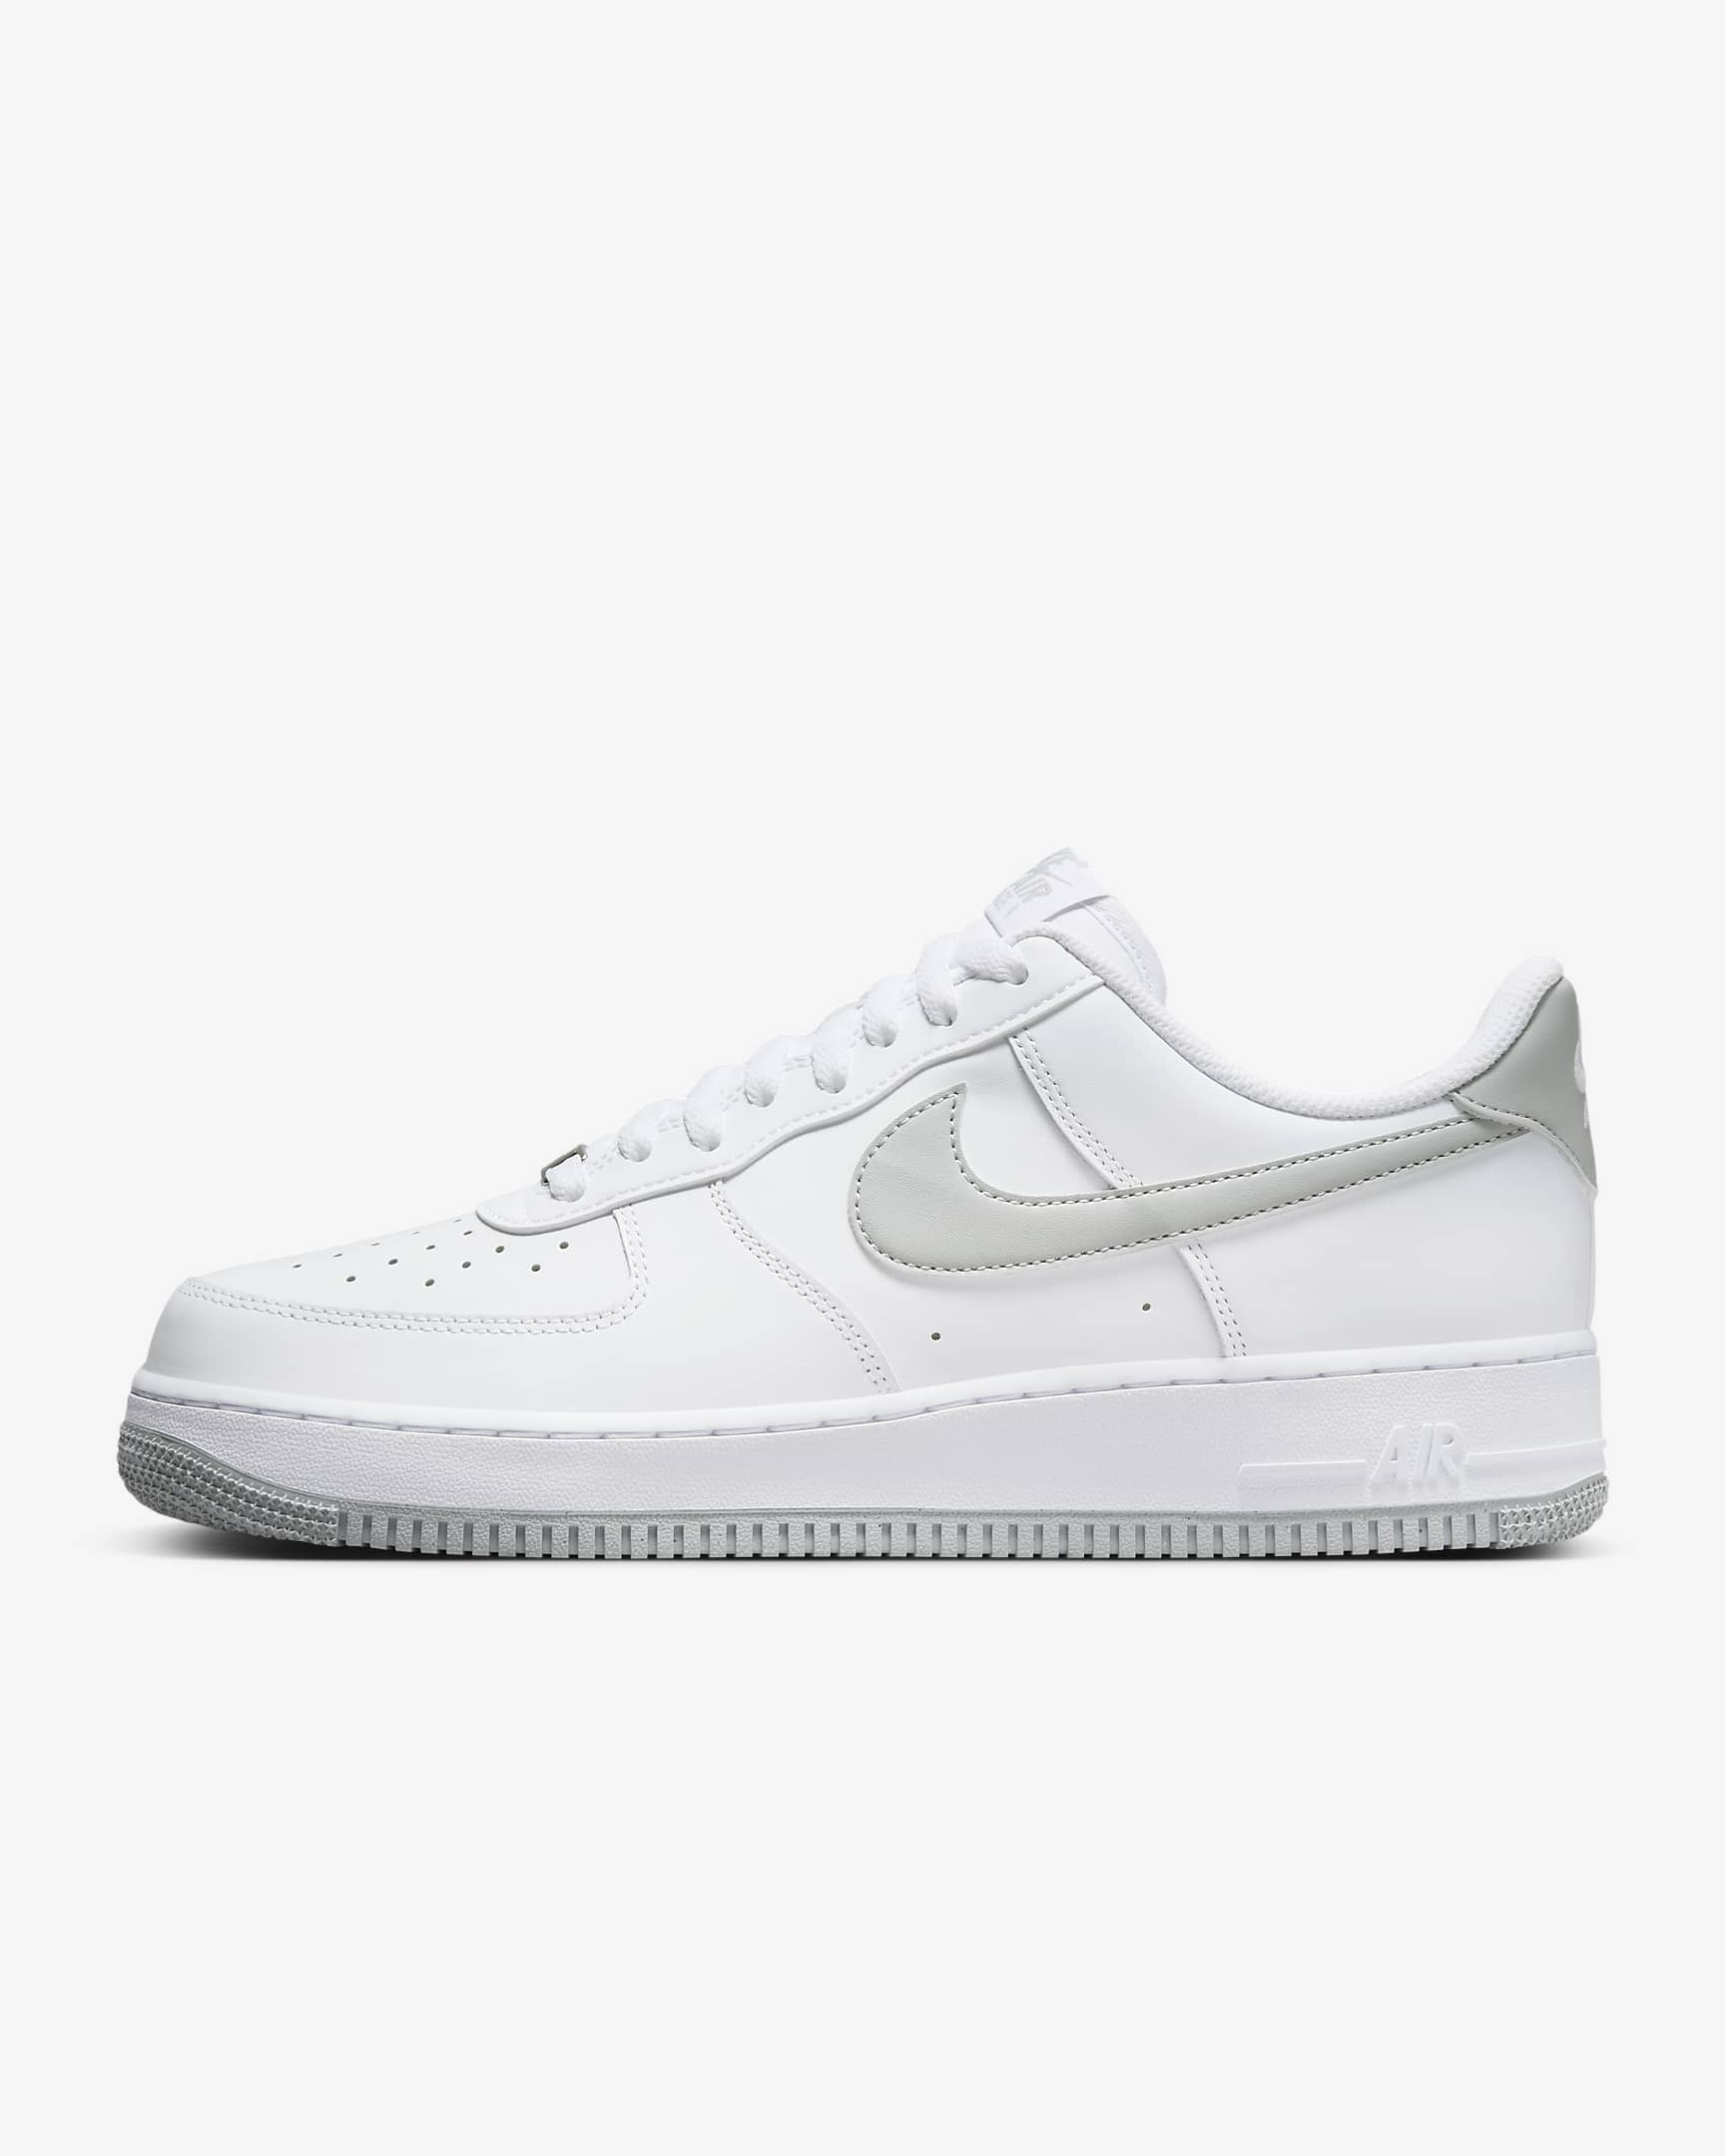 Nike Air Force 1 '07 Men's Shoes. Nike MY